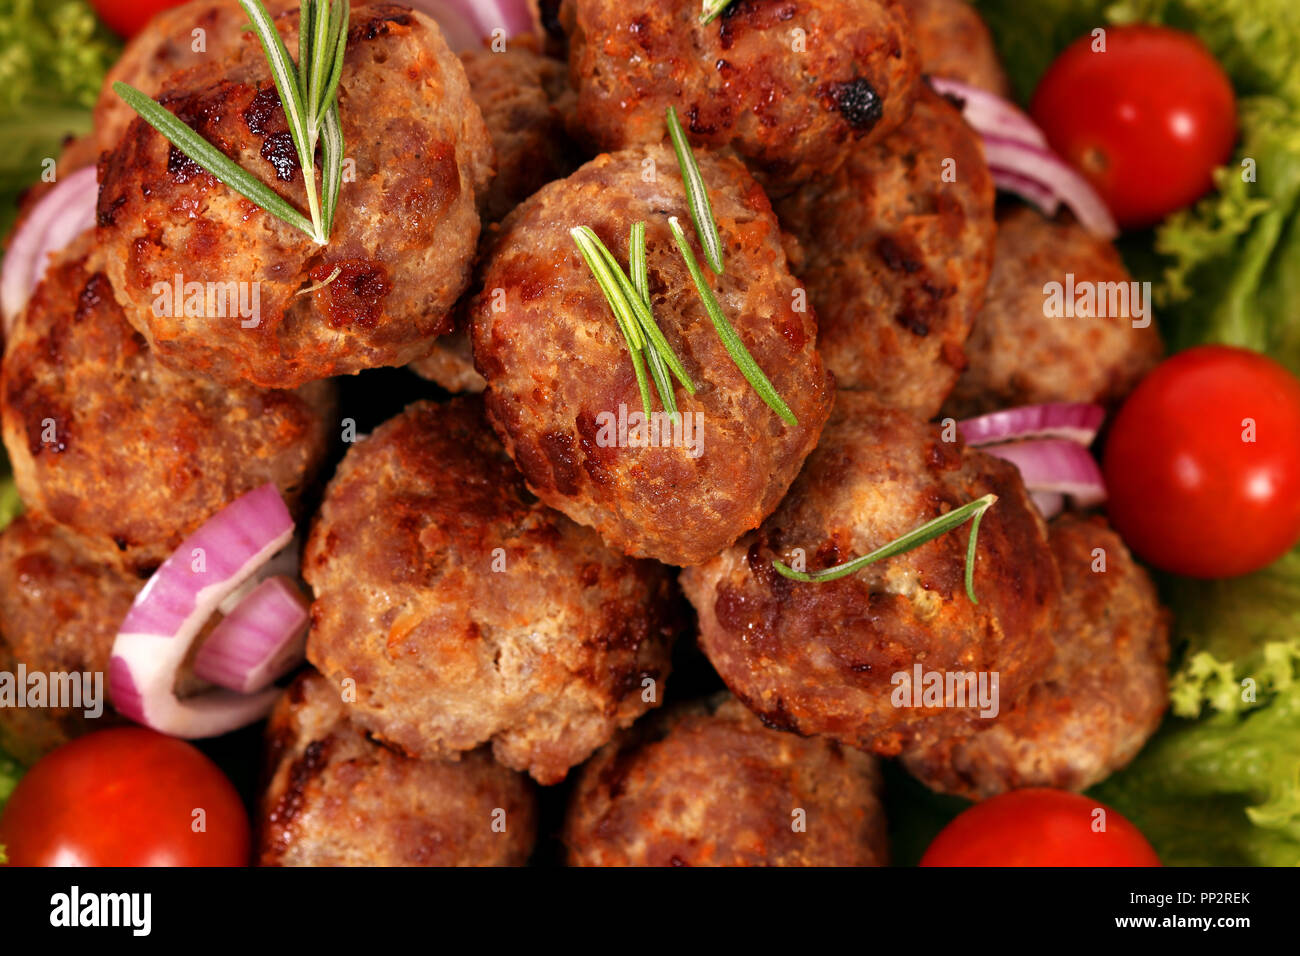 meatballs with tomatoes and salad close up Stock Photo